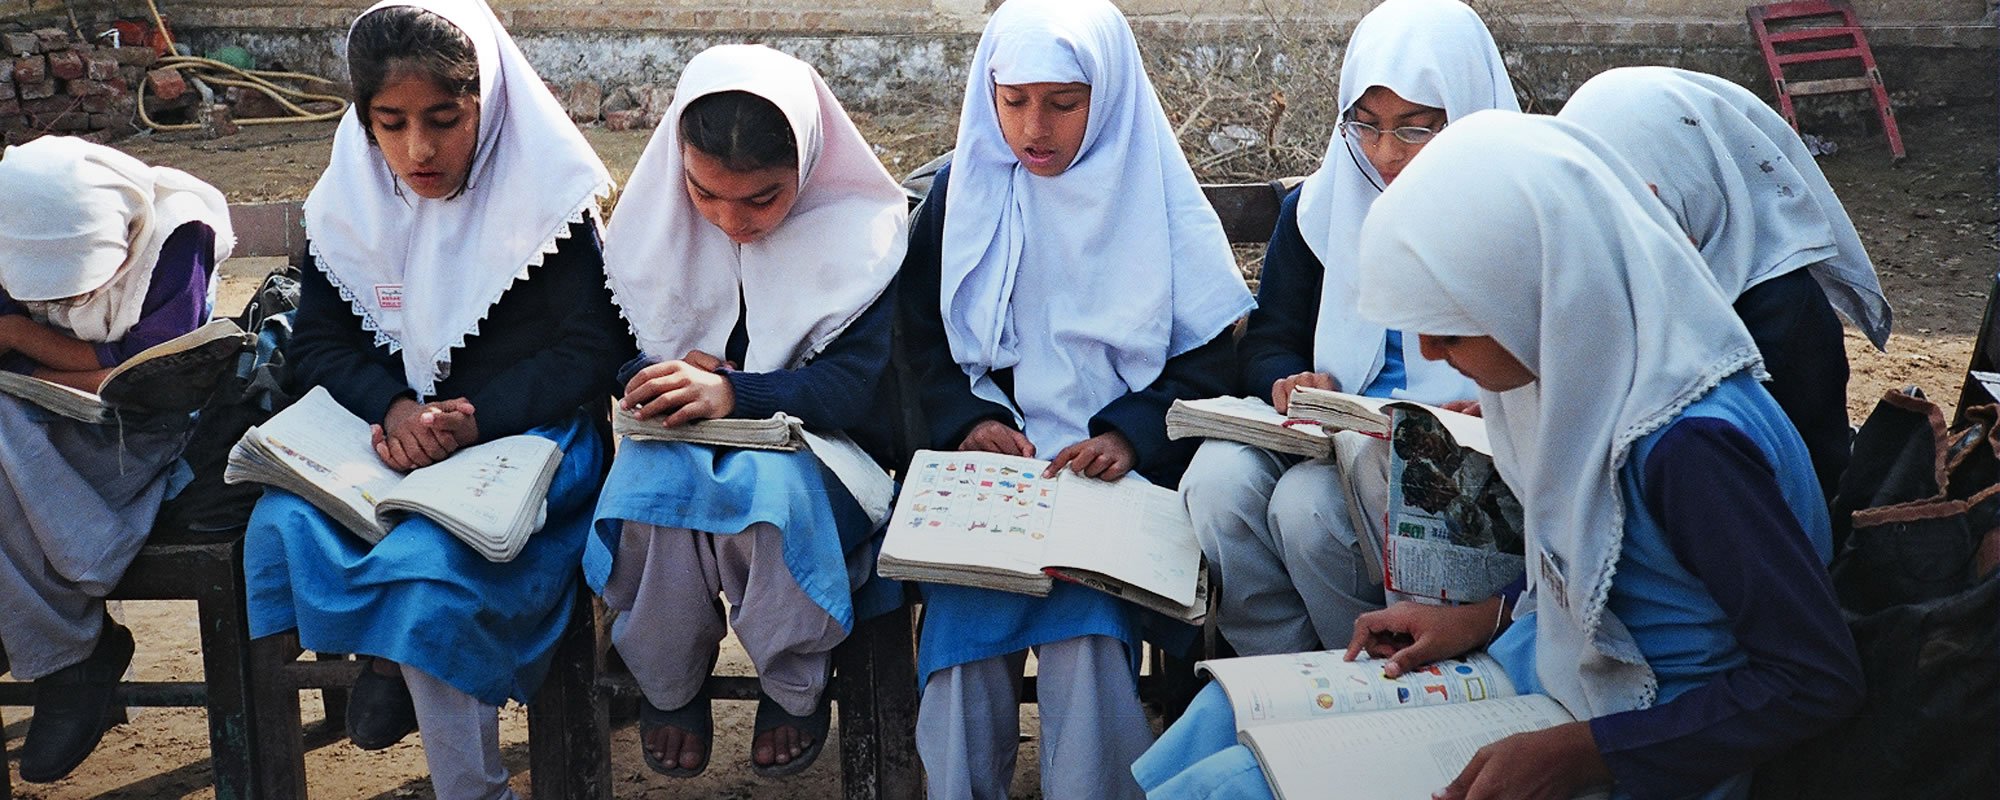 Group of girl students with head coverings studying with workbooks